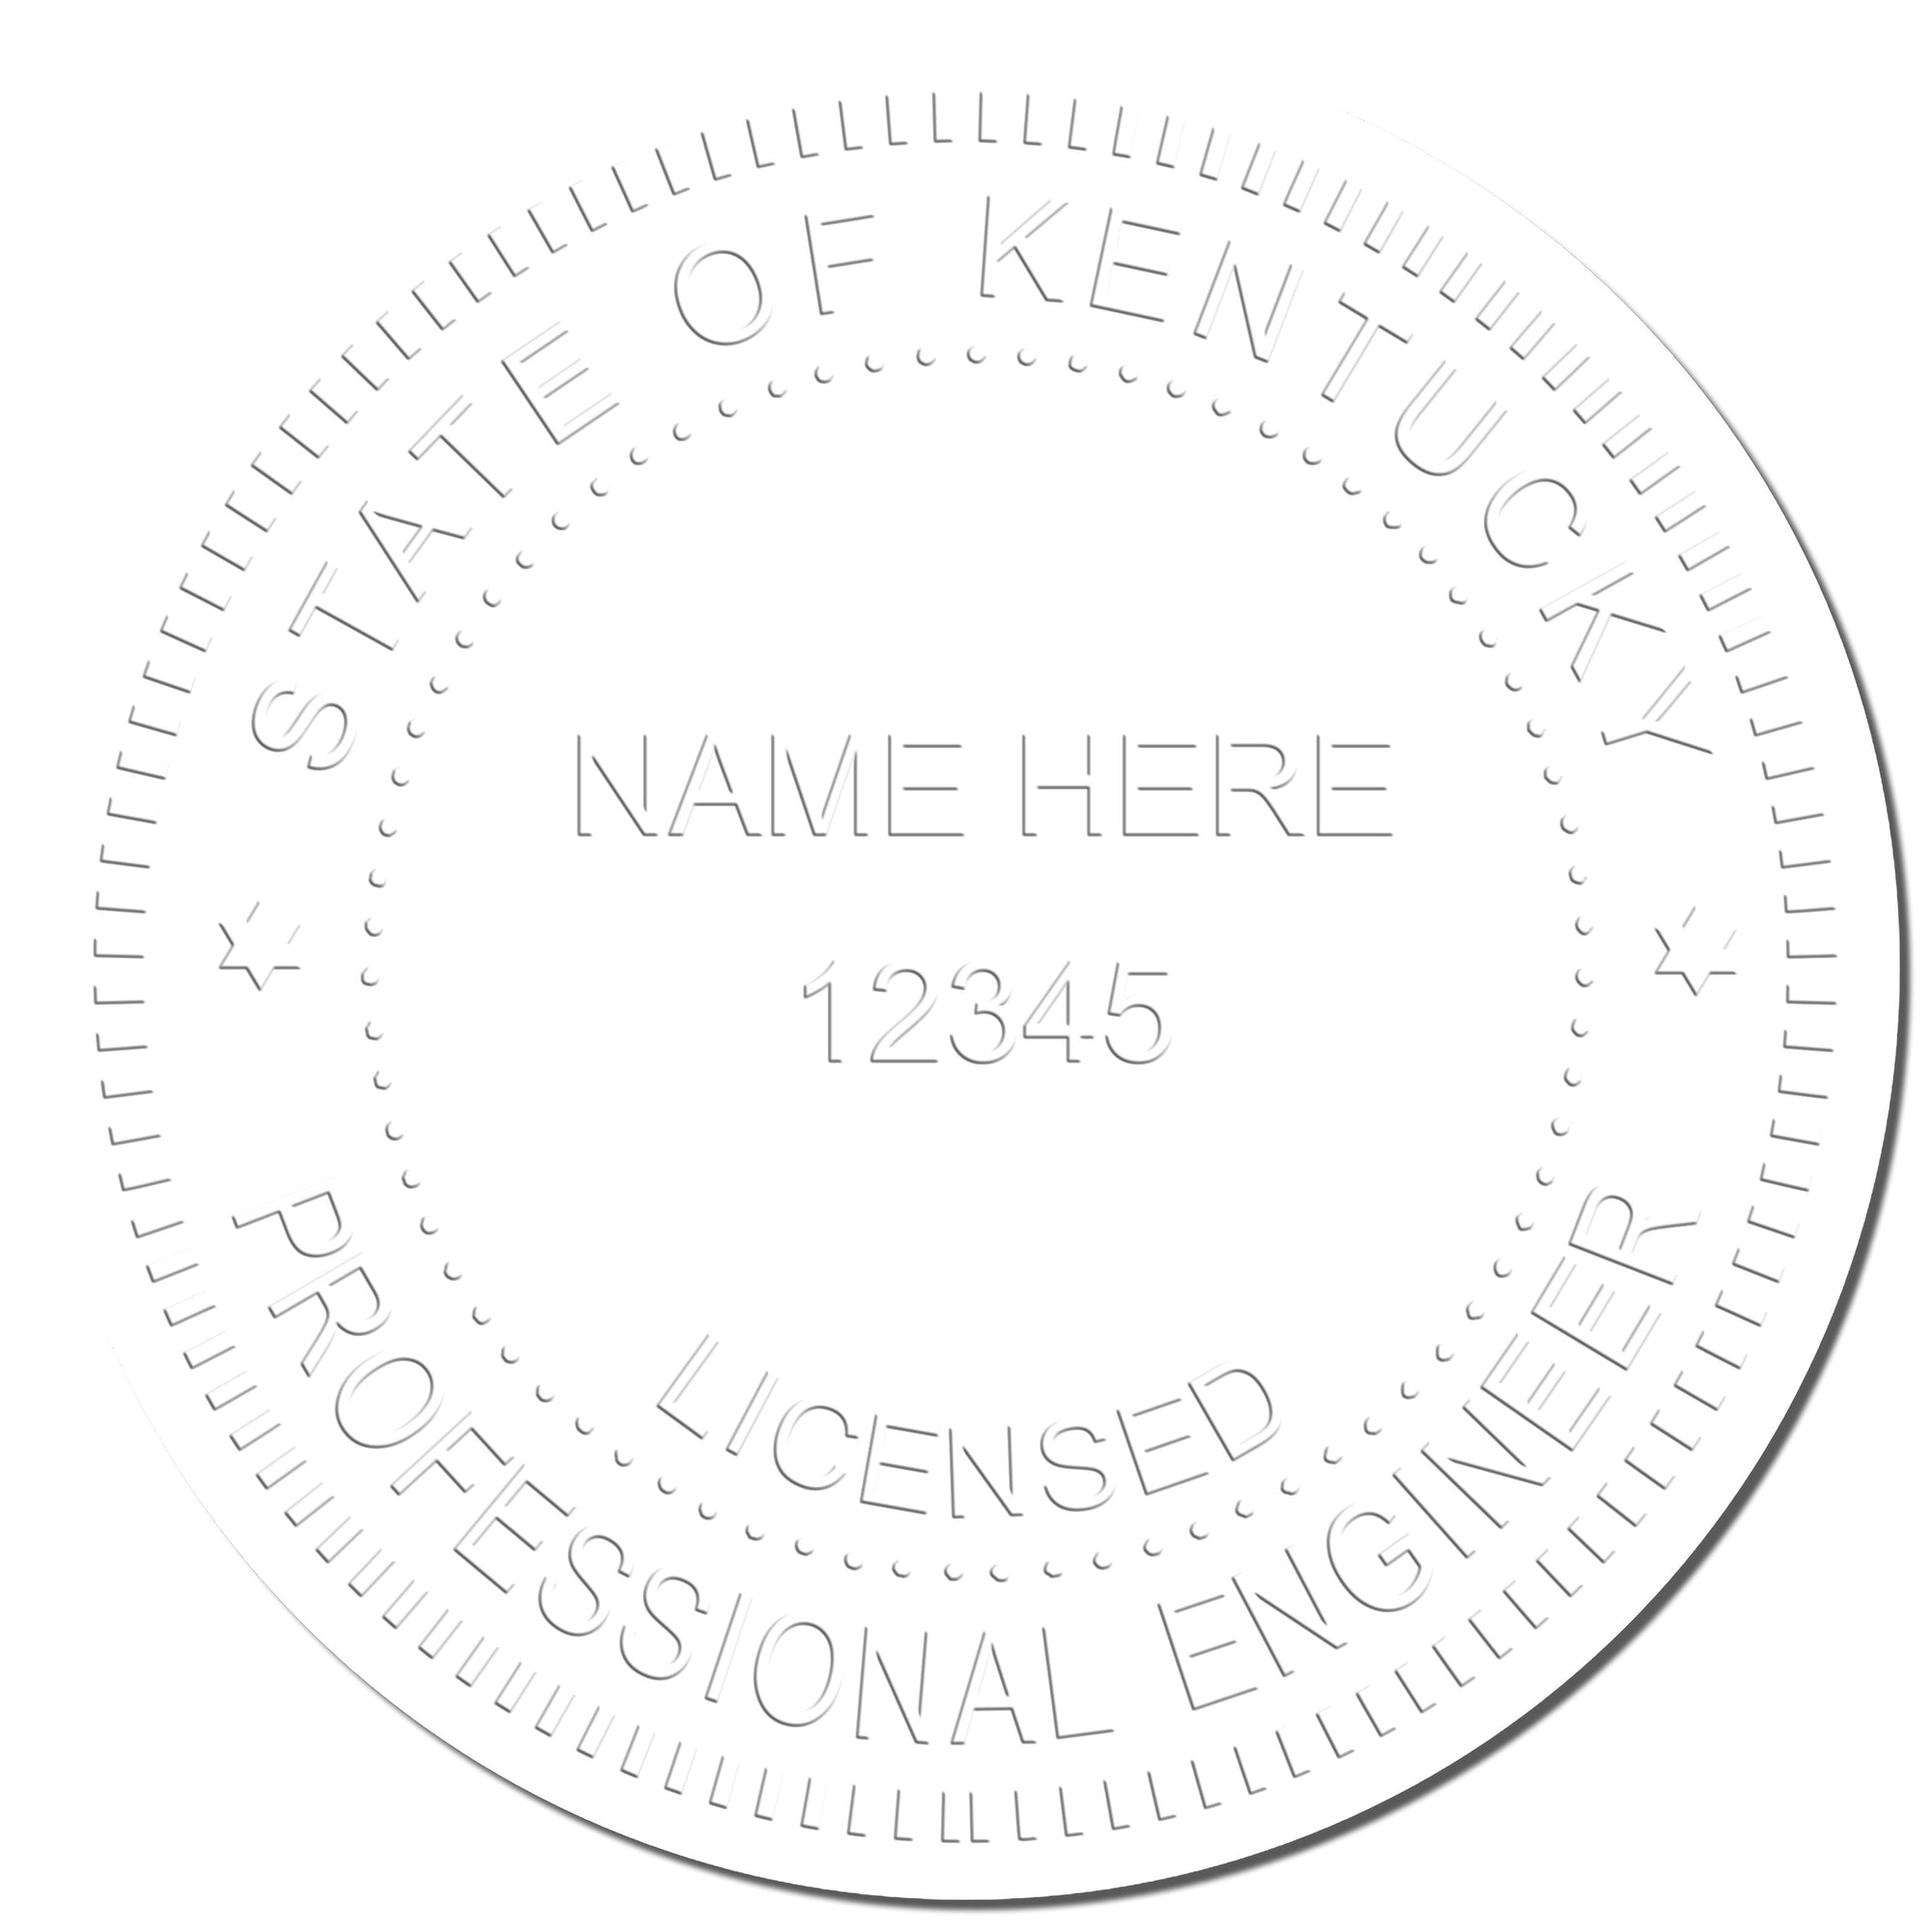 The main image for the Kentucky Engineer Desk Seal depicting a sample of the imprint and electronic files